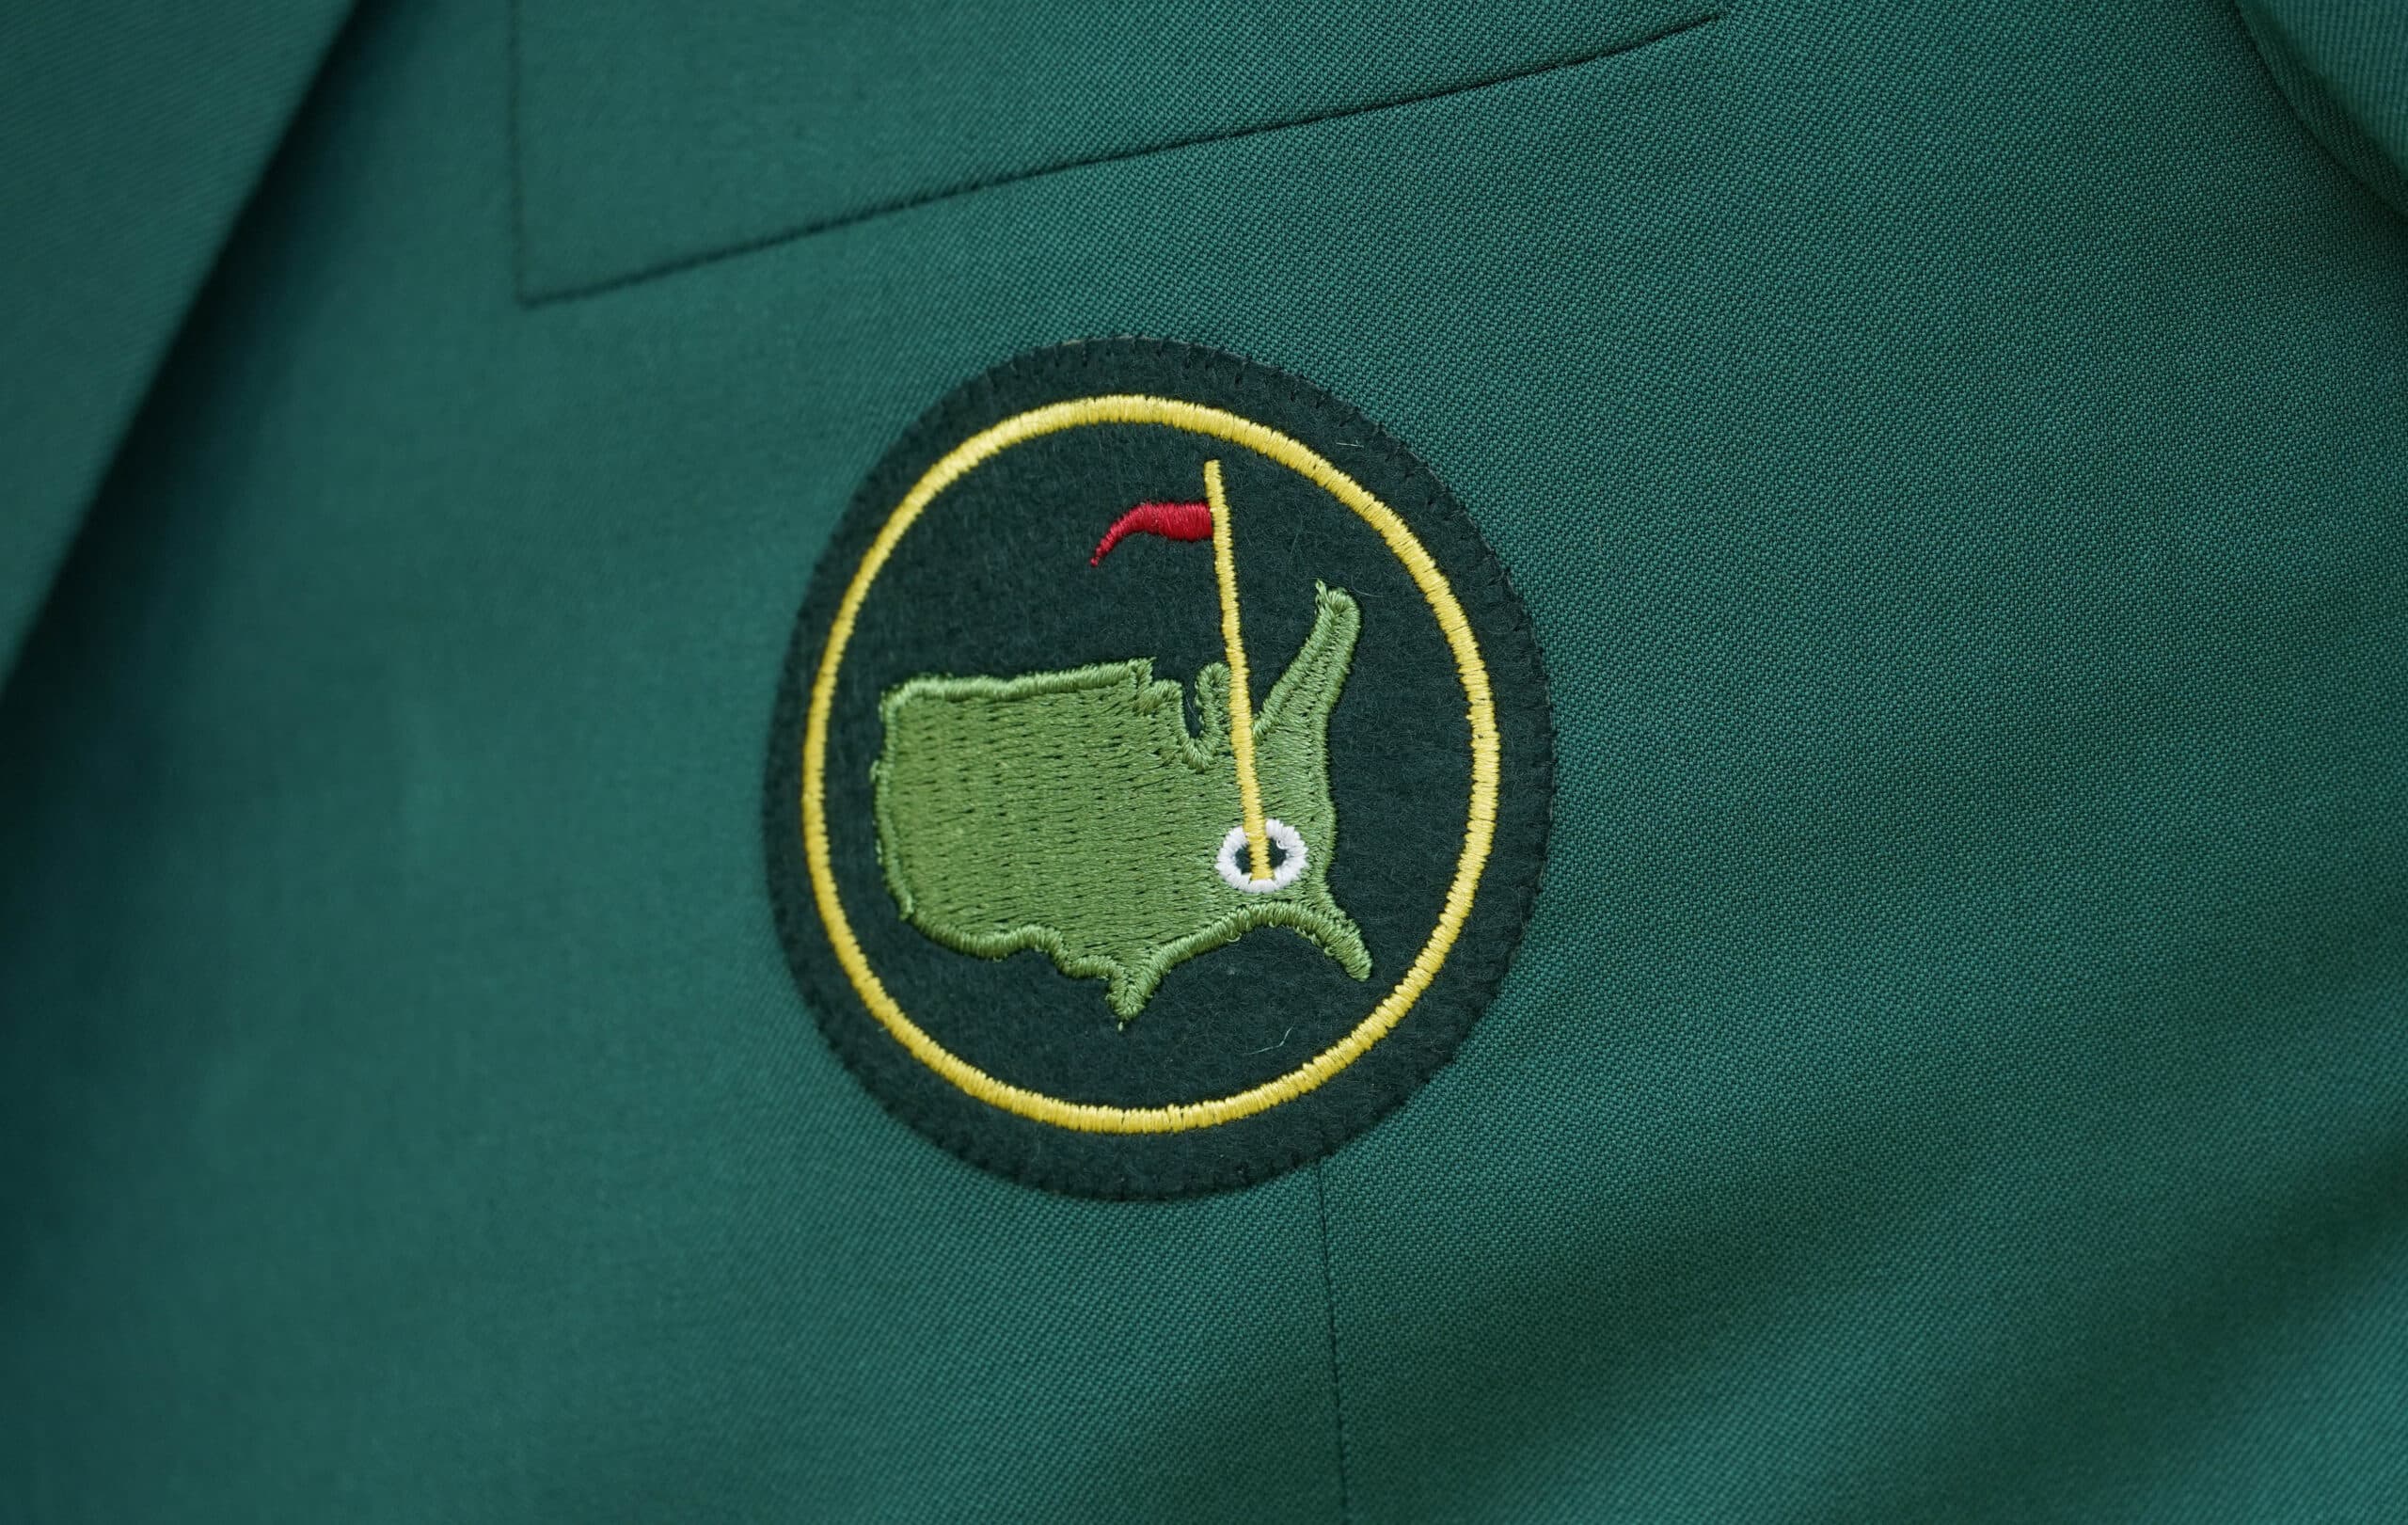 Apr 8, 2021; Augusta, Georgia, USA; Detailed view of a logo on a member's green jacket during the first round of The Masters golf tournament.